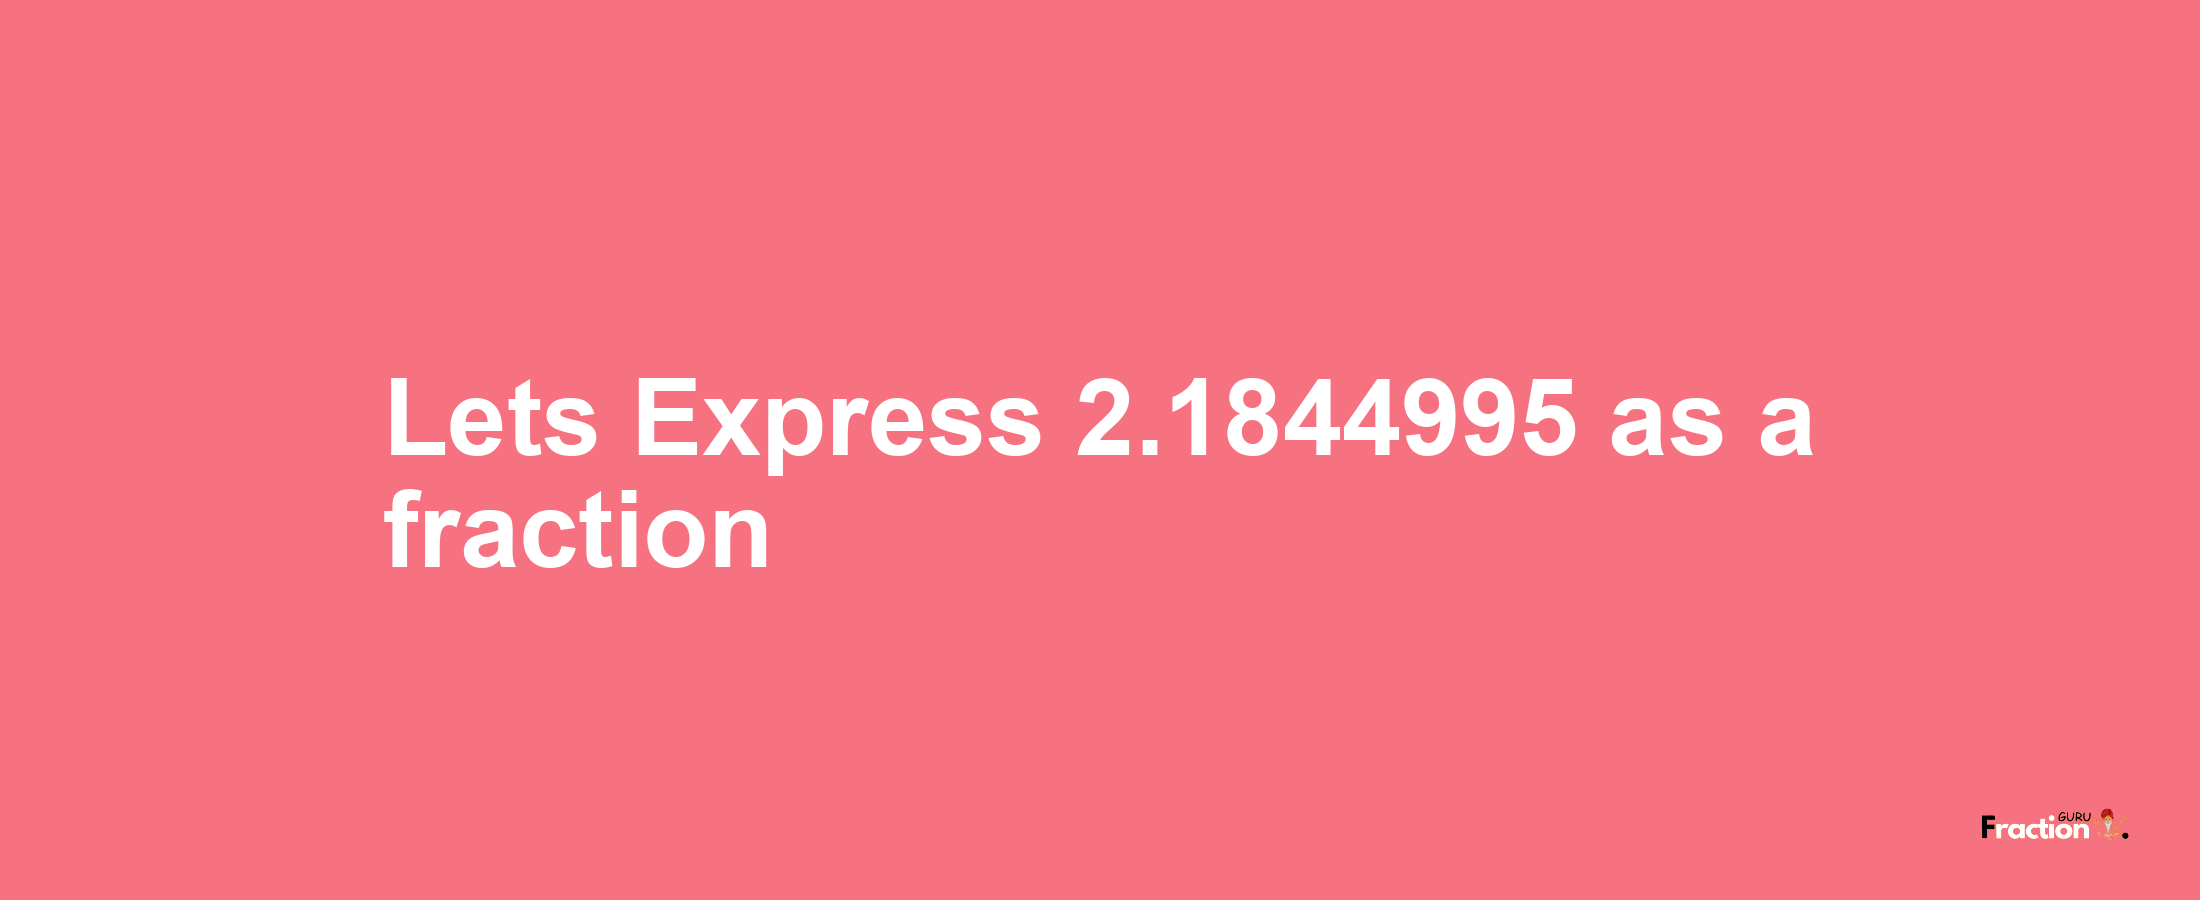 Lets Express 2.1844995 as afraction